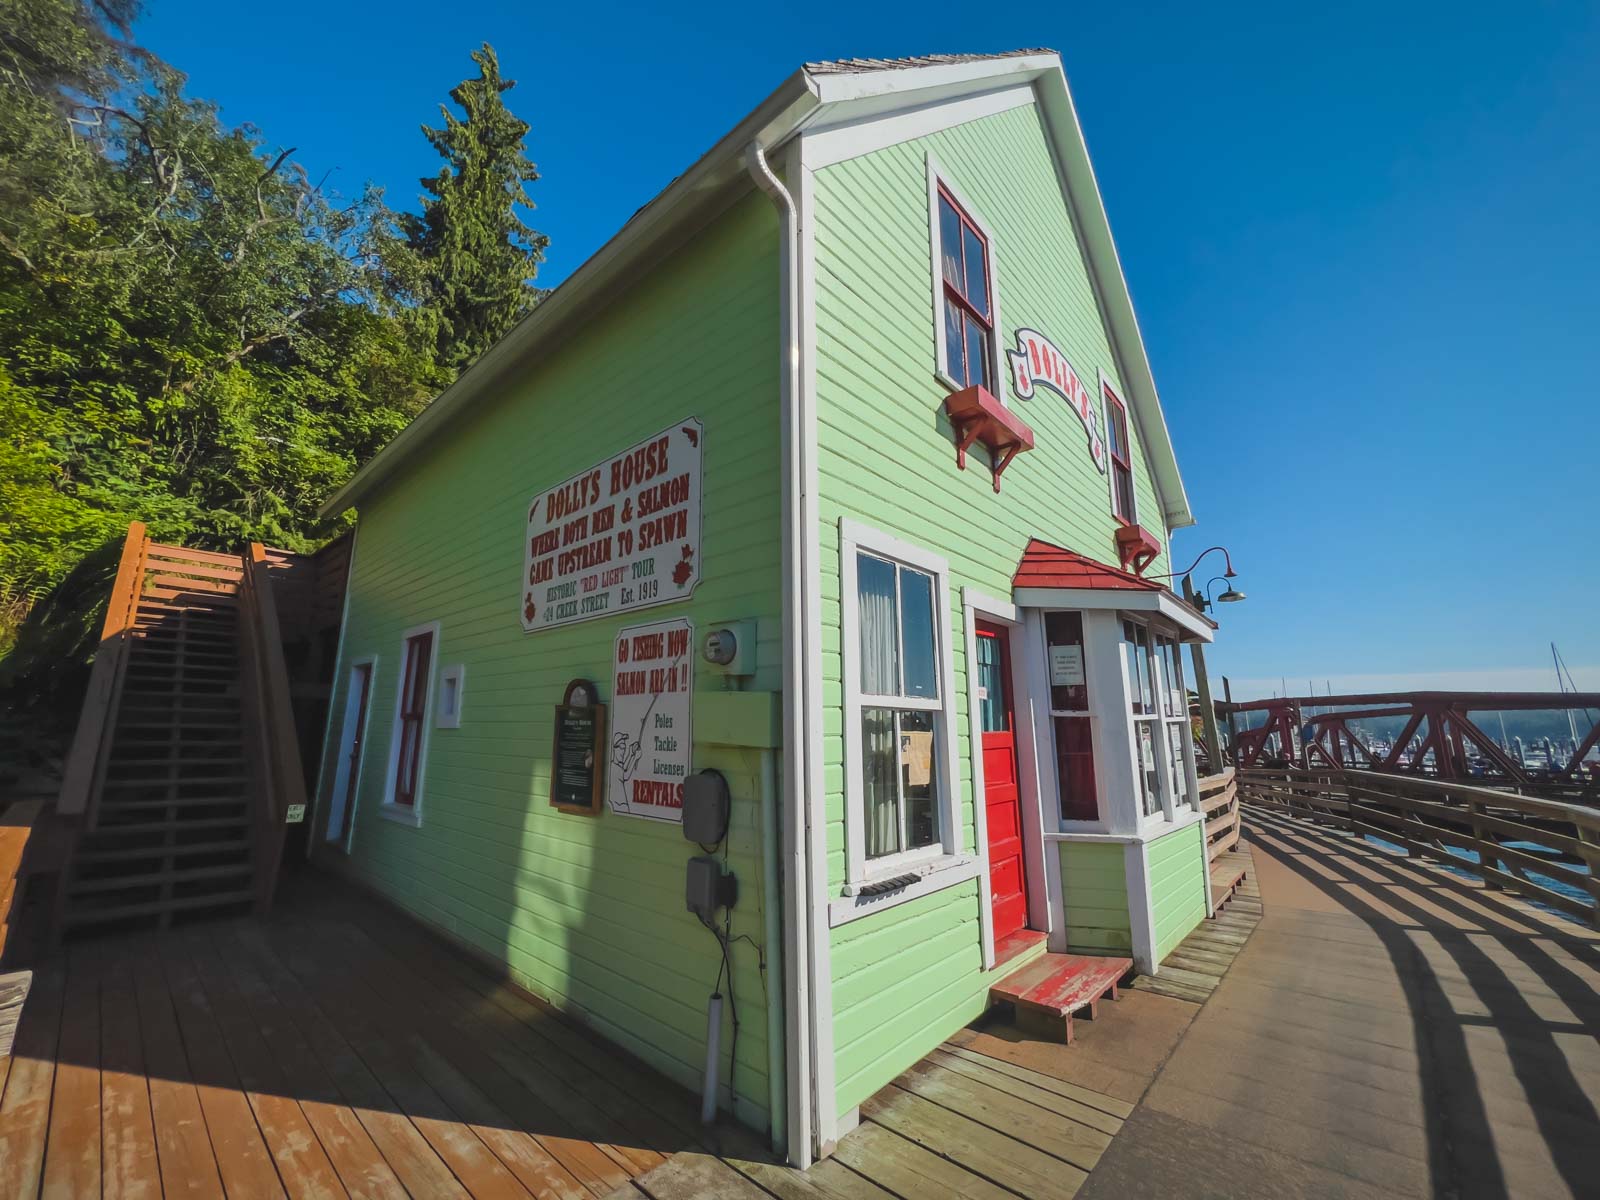 Things to do in Ketchikan Dolly's house museum